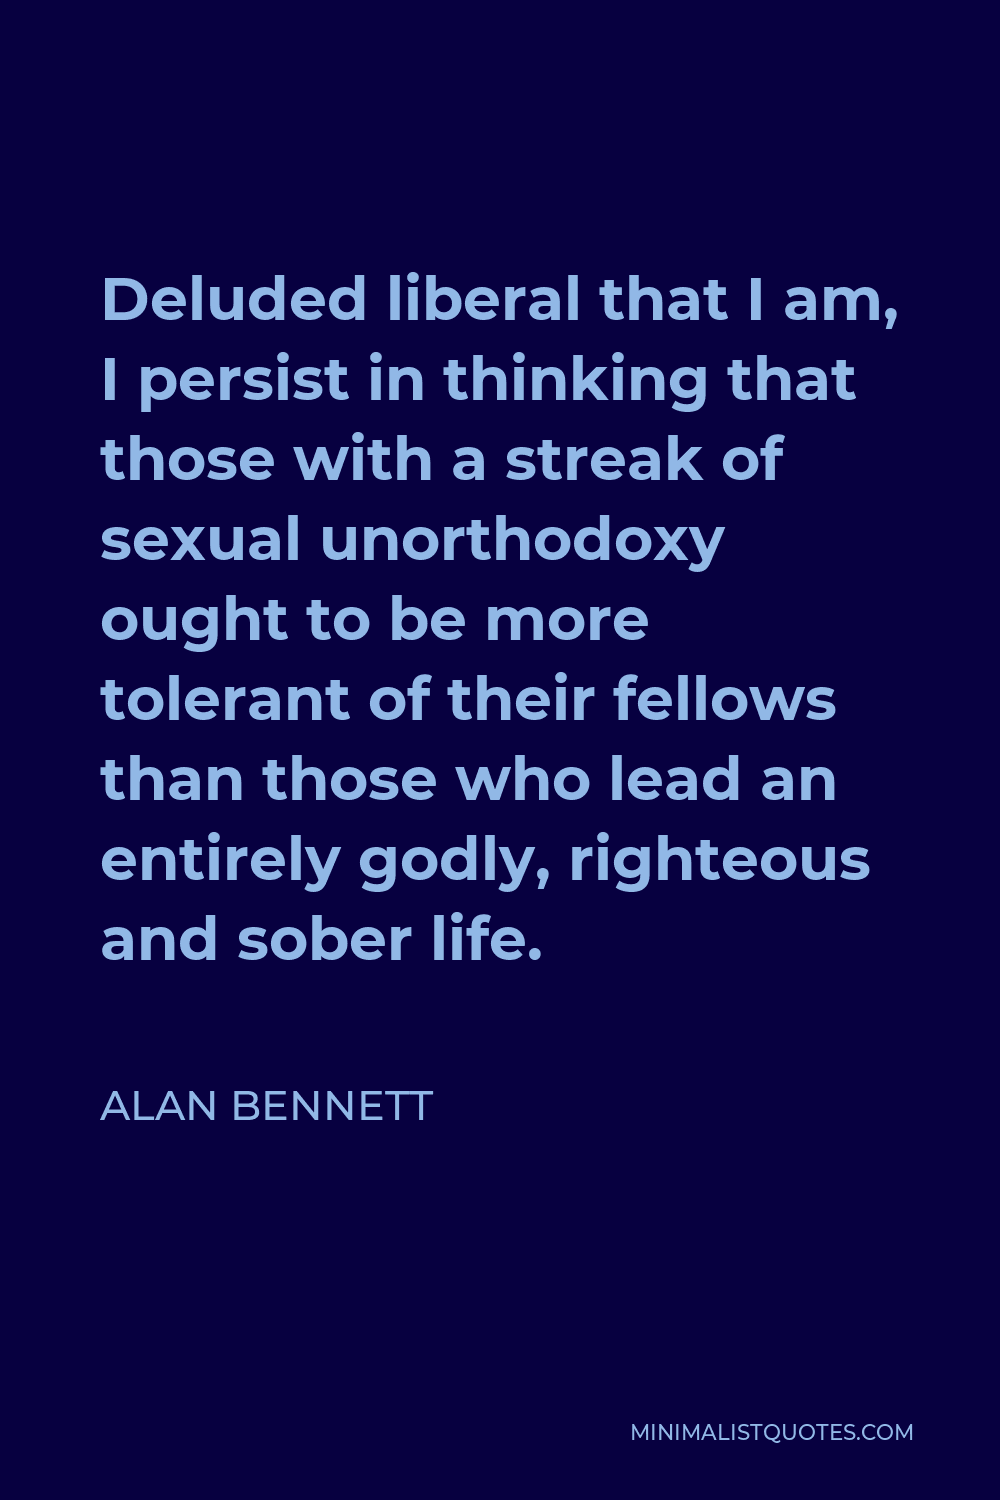 Alan Bennett Quote - Deluded liberal that I am, I persist in thinking that those with a streak of sexual unorthodoxy ought to be more tolerant of their fellows than those who lead an entirely godly, righteous and sober life.